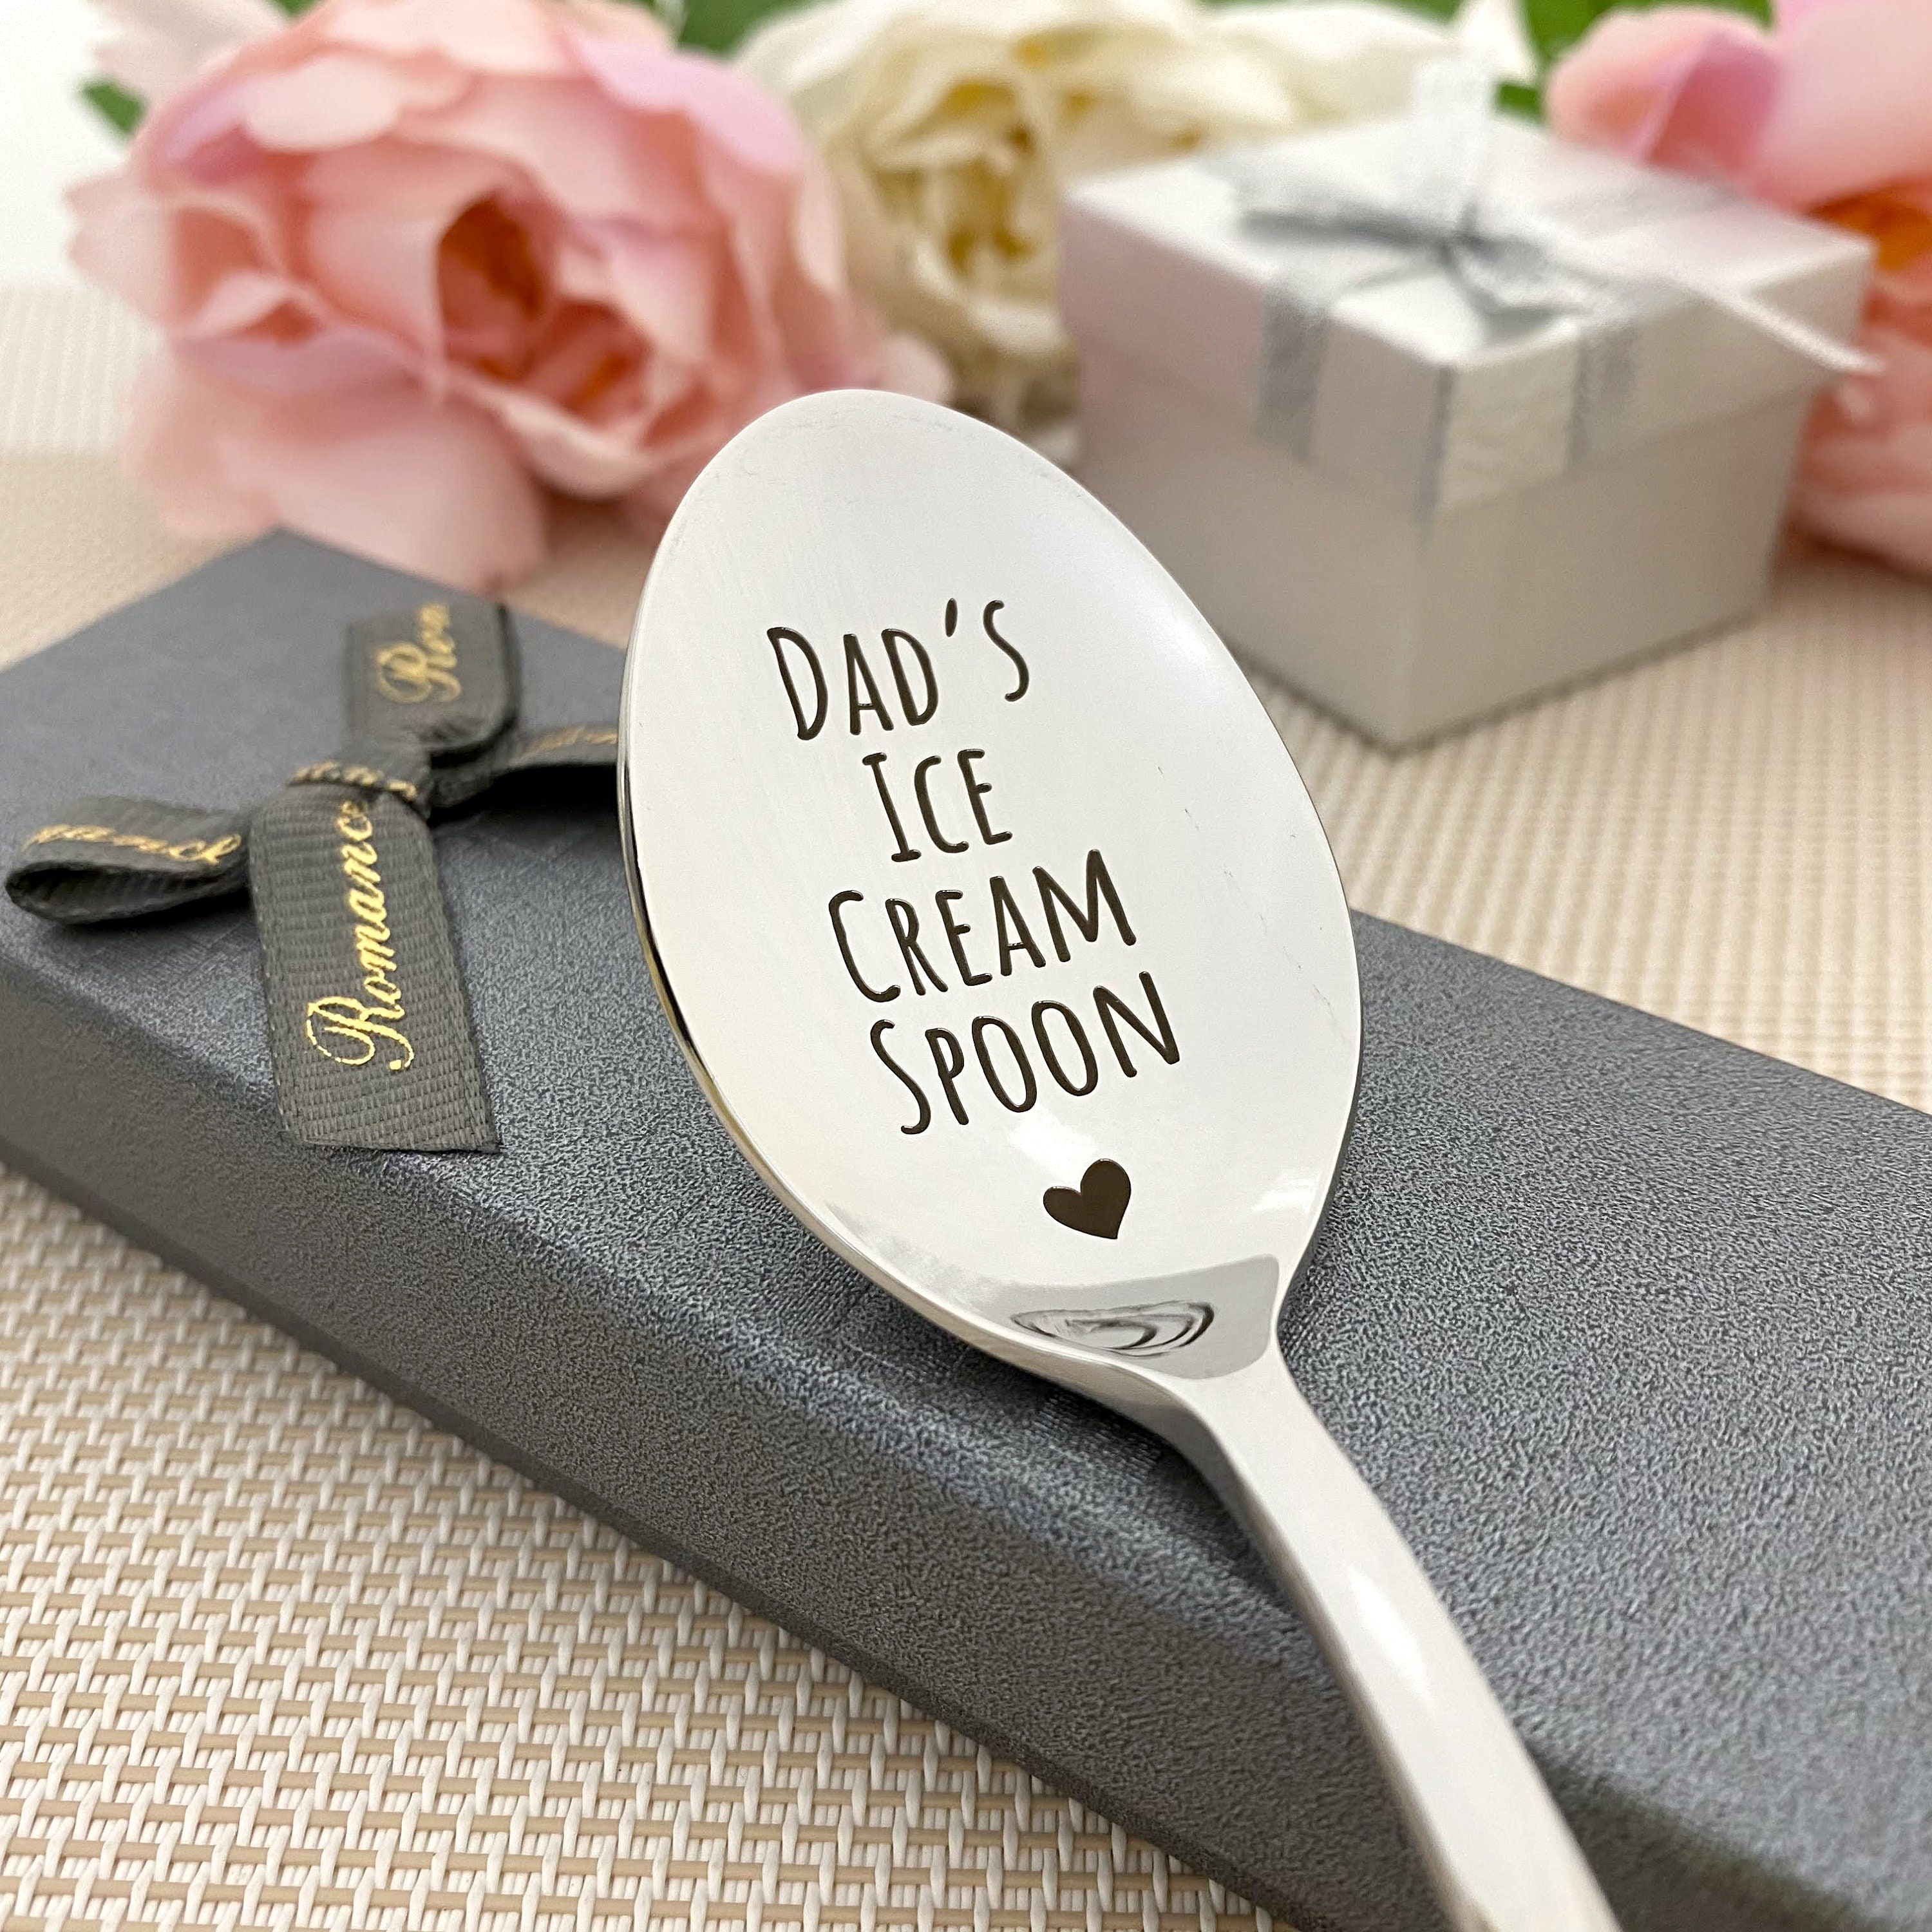  Husband Gifts - Fathers Day Husband Gifts from Wife, Gift for  Husband Ice Cream Bowl with Scoop & Shovel Spoon Set, Husband Ice Cream  Cereal Bowl Present from Wife, Cool Birthday